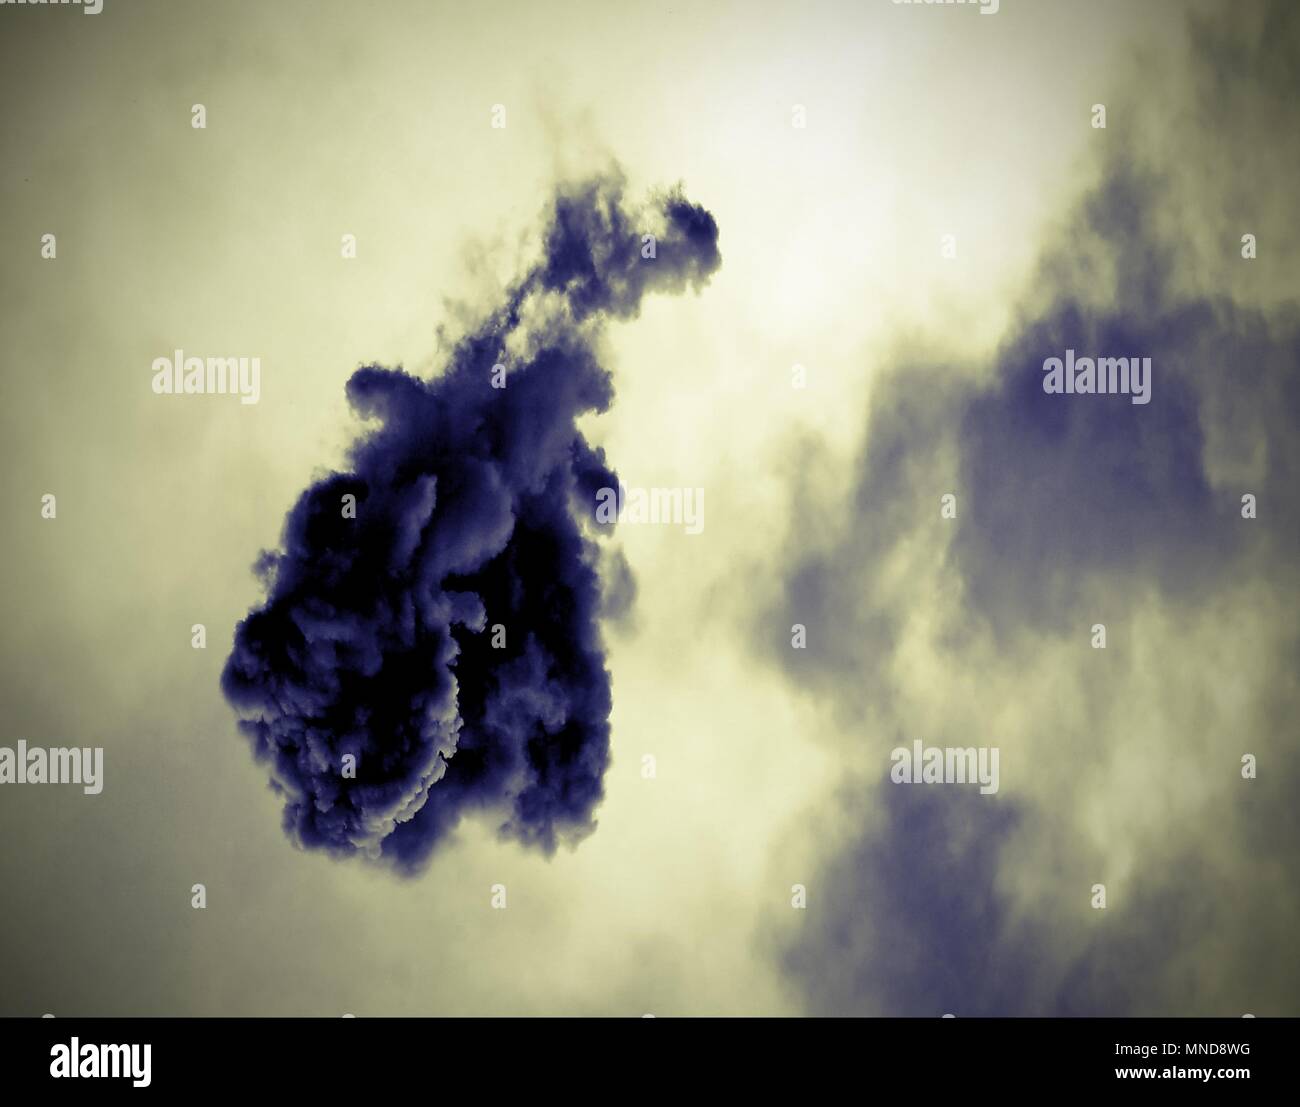 black cloud after the explosion of the rocket in the sky with vintage old effect Stock Photo